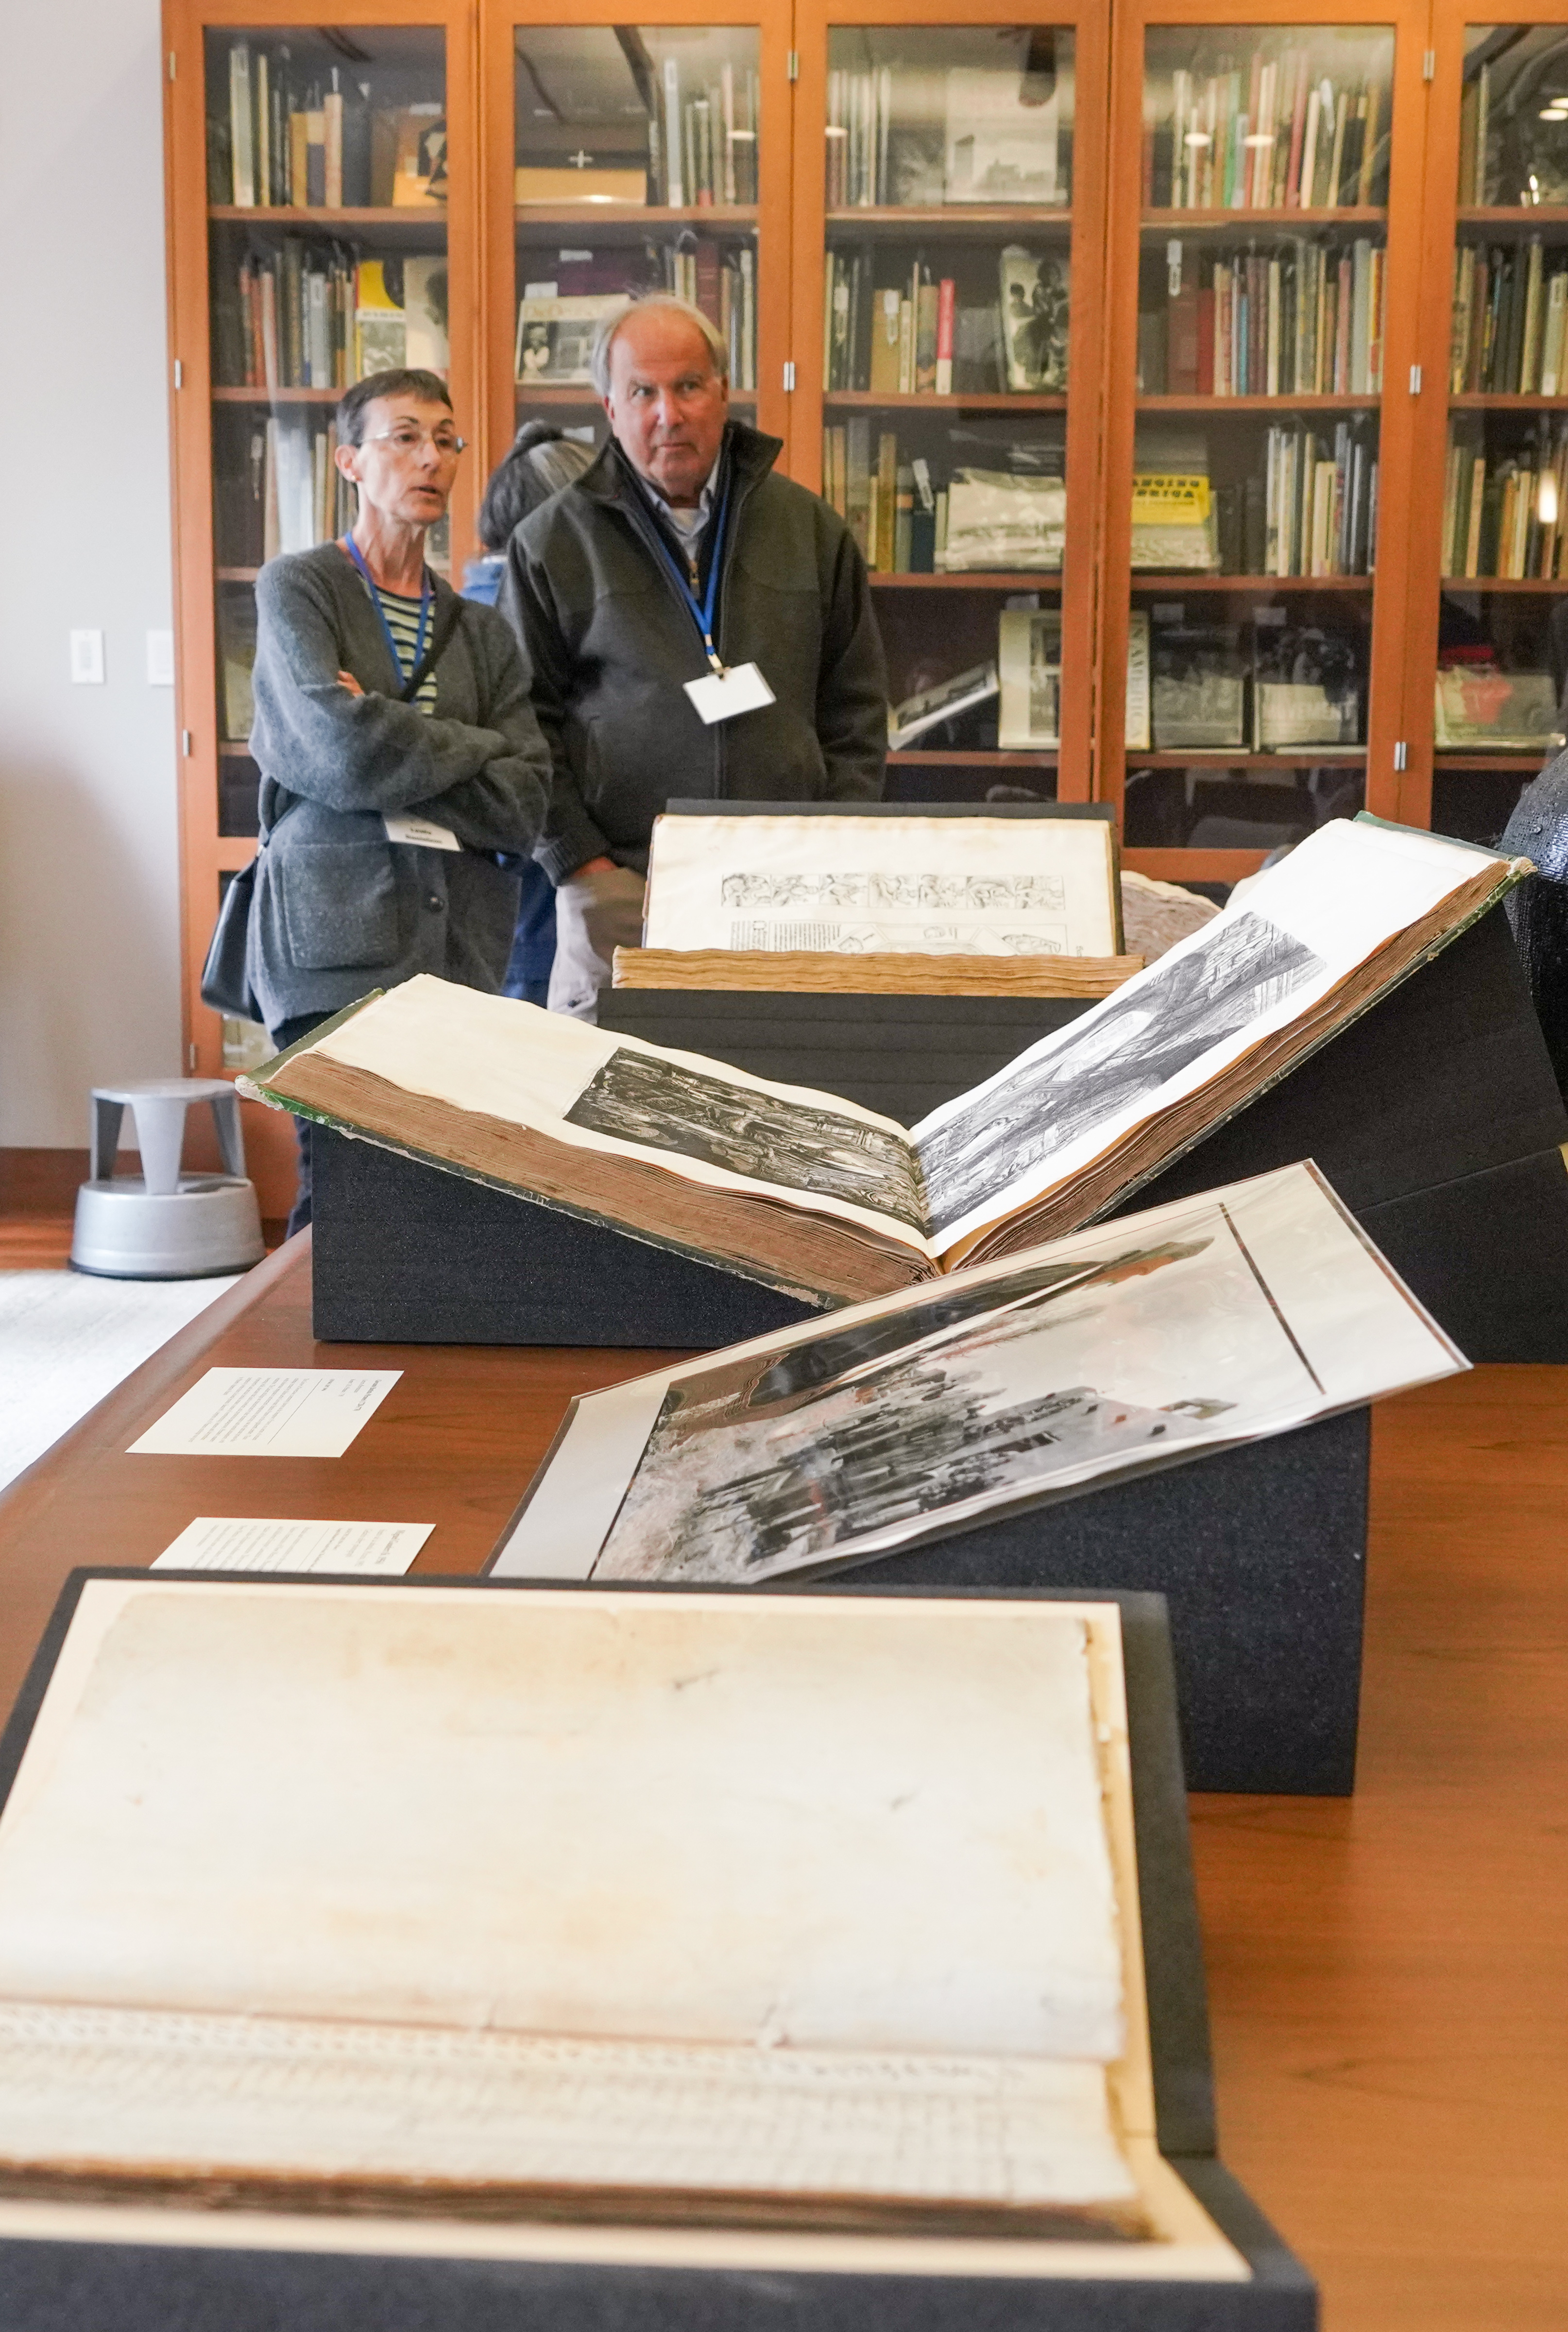 A couple looks over the items on display in the Bancroft Library